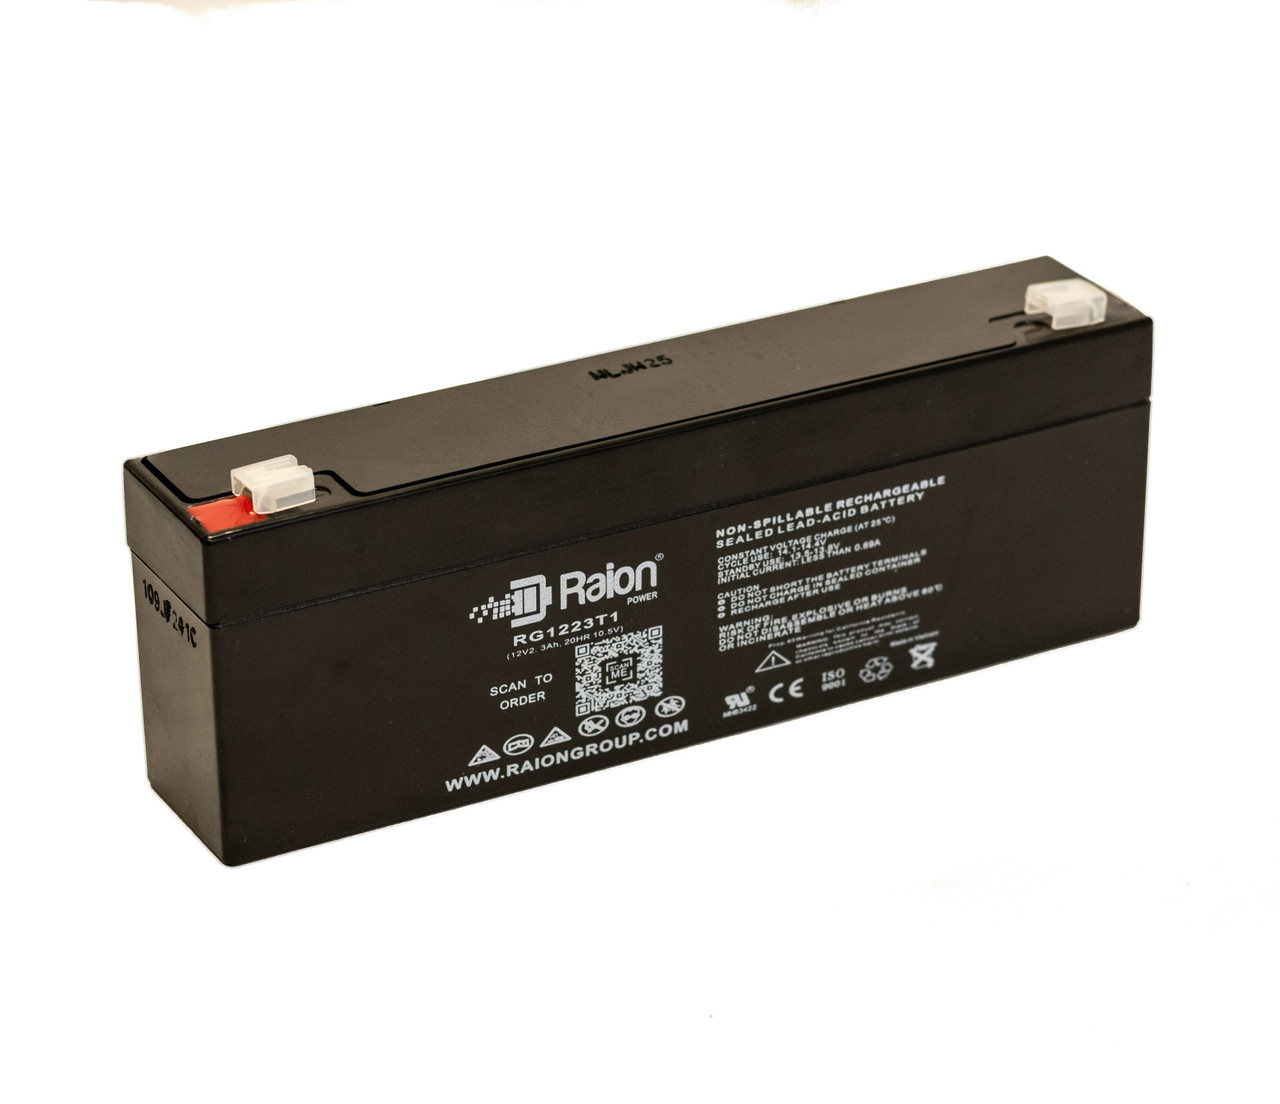 Raion Power RG1223T1 Replacement Battery for Invivo Research Inc. 1400 OMEGA BP Monitor